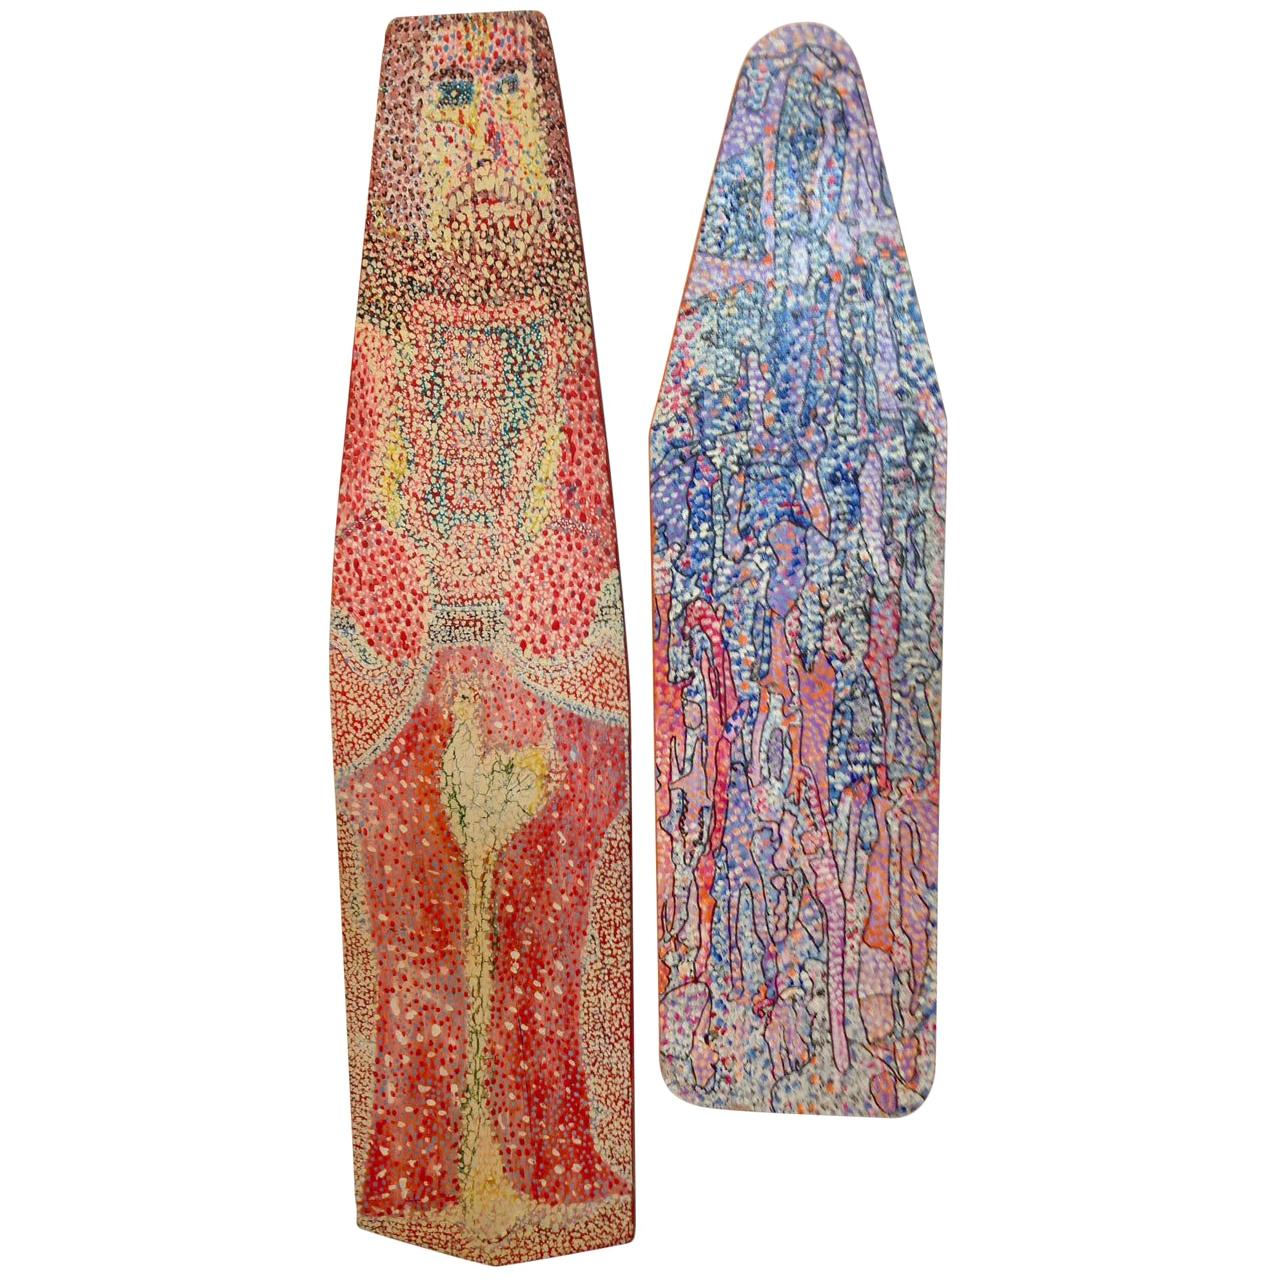 Pair of Outsider Art Painted Ironing Boards by Michael Heinrich